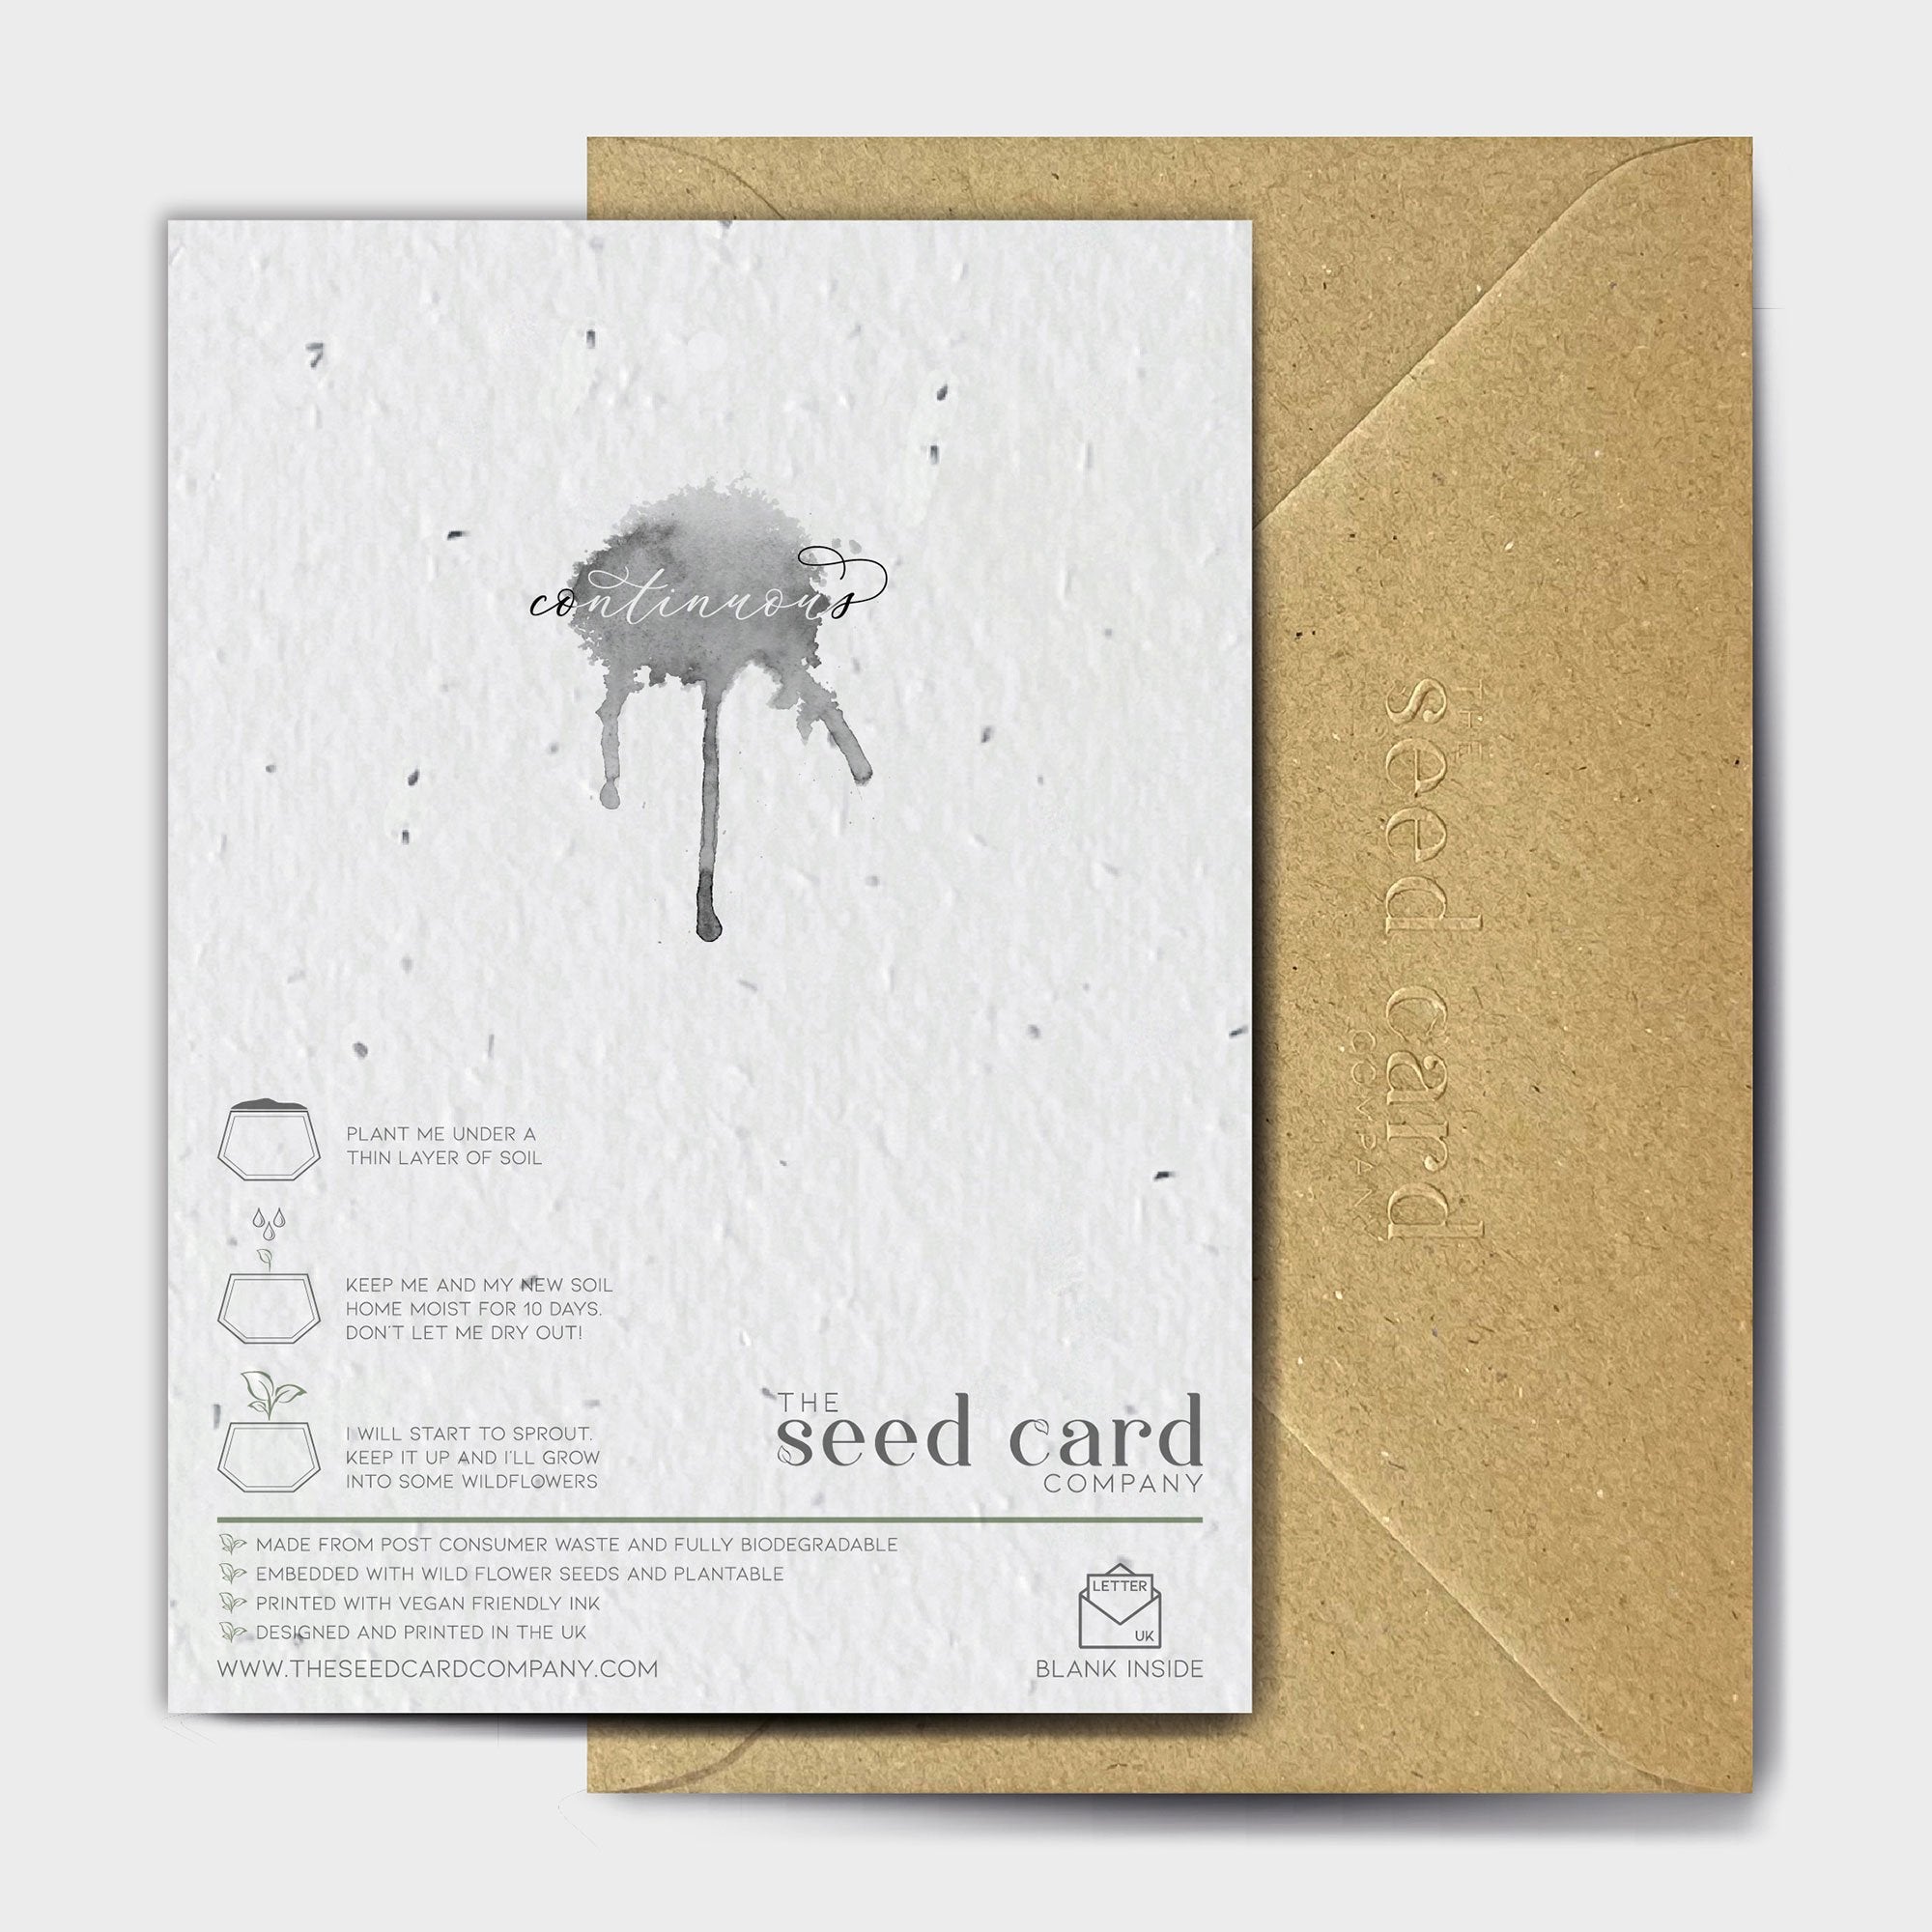 Shop online Always Watching - 100% biodegradable seed-embedded cards Shop -The Seed Card Company